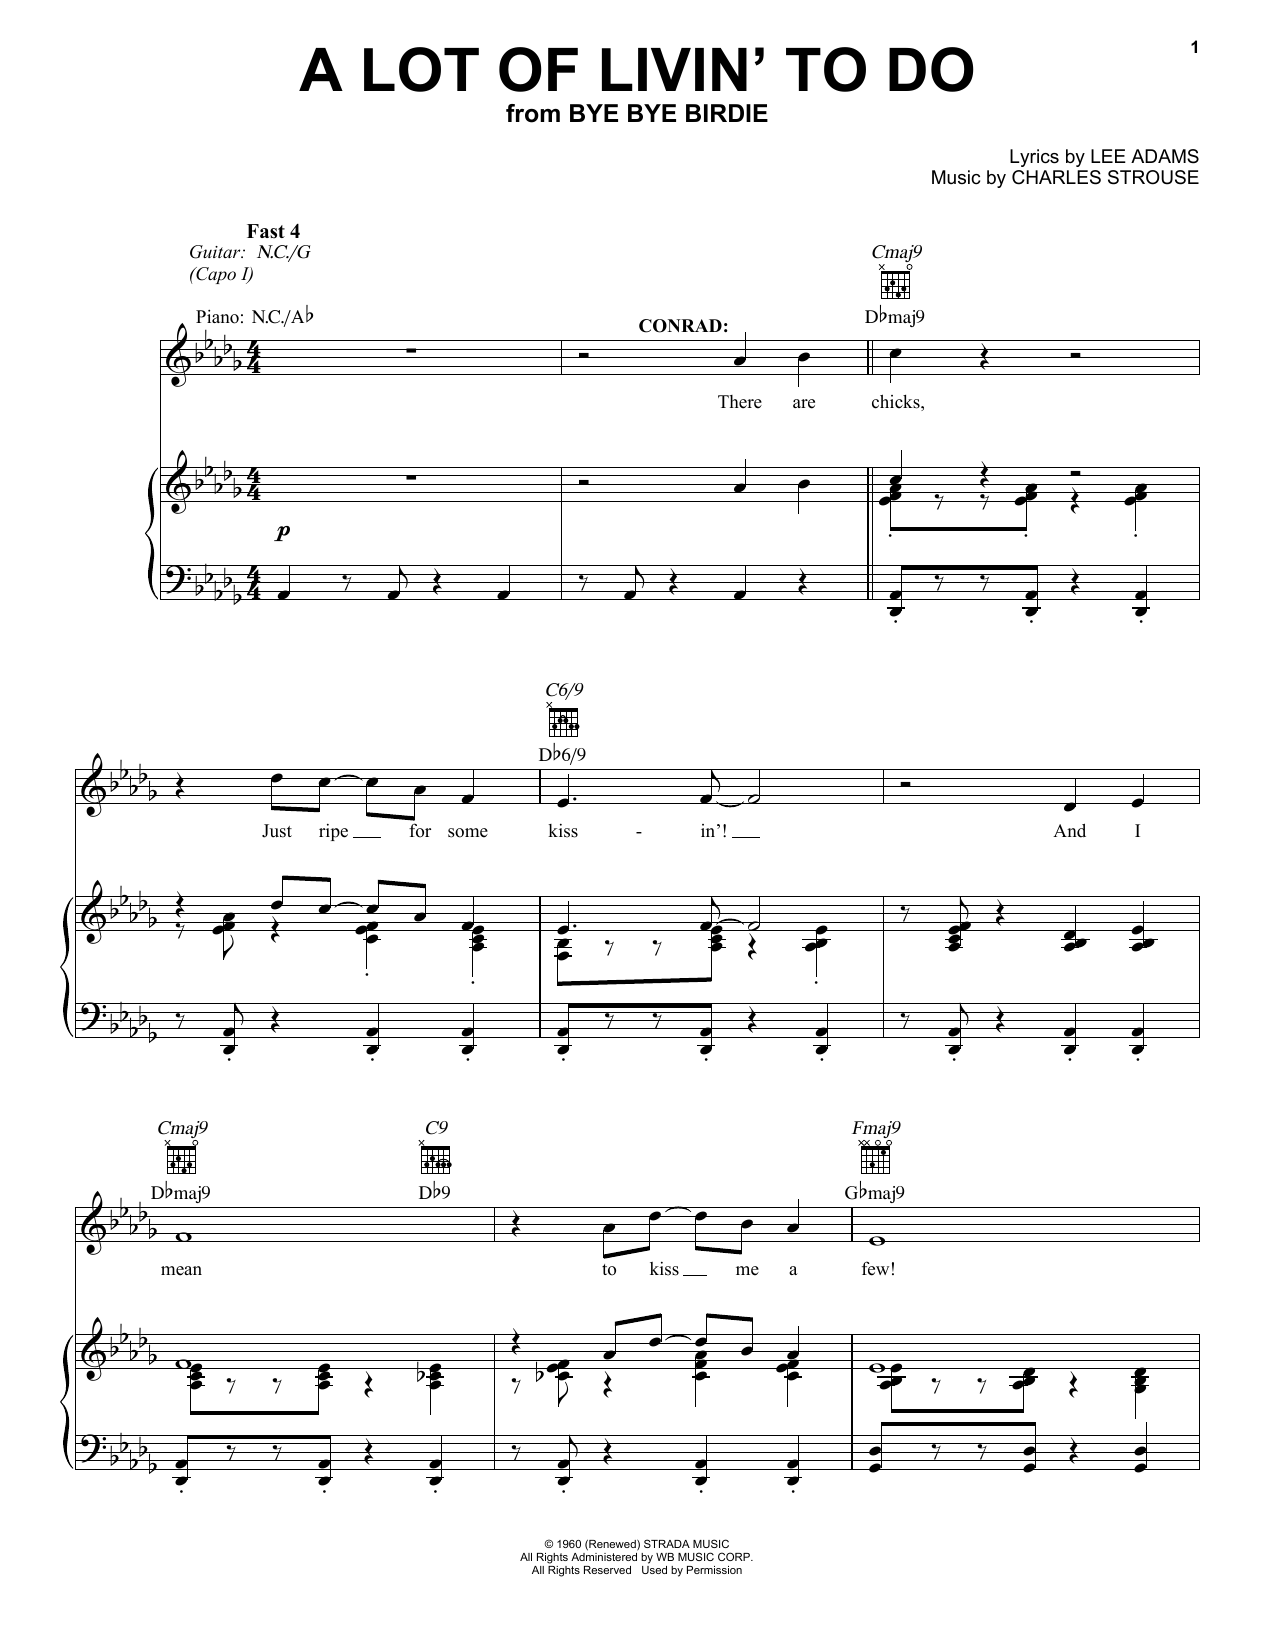 Charles Strouse A Lot Of Livin' To Do (from Bye Bye Birdie) sheet music notes printable PDF score